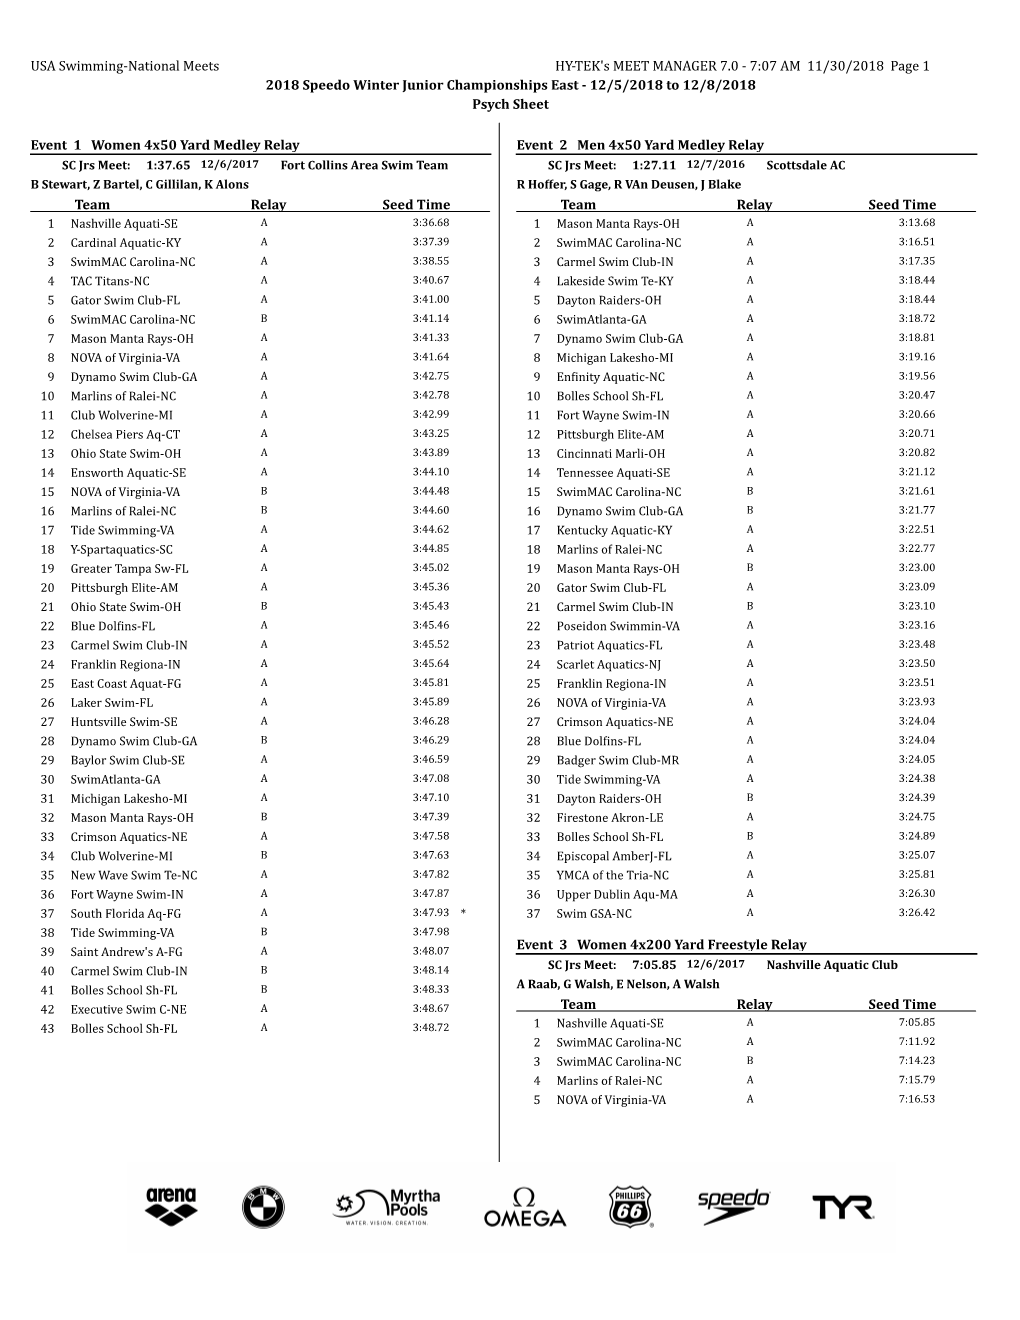 USA Swimming-National Meets HY-TEK's MEET MANAGER 7.0 - 7:07 AM 11/30/2018 Page 1 2018 Speedo Winter Junior Championships East - 12/5/2018 to 12/8/2018 Psych Sheet